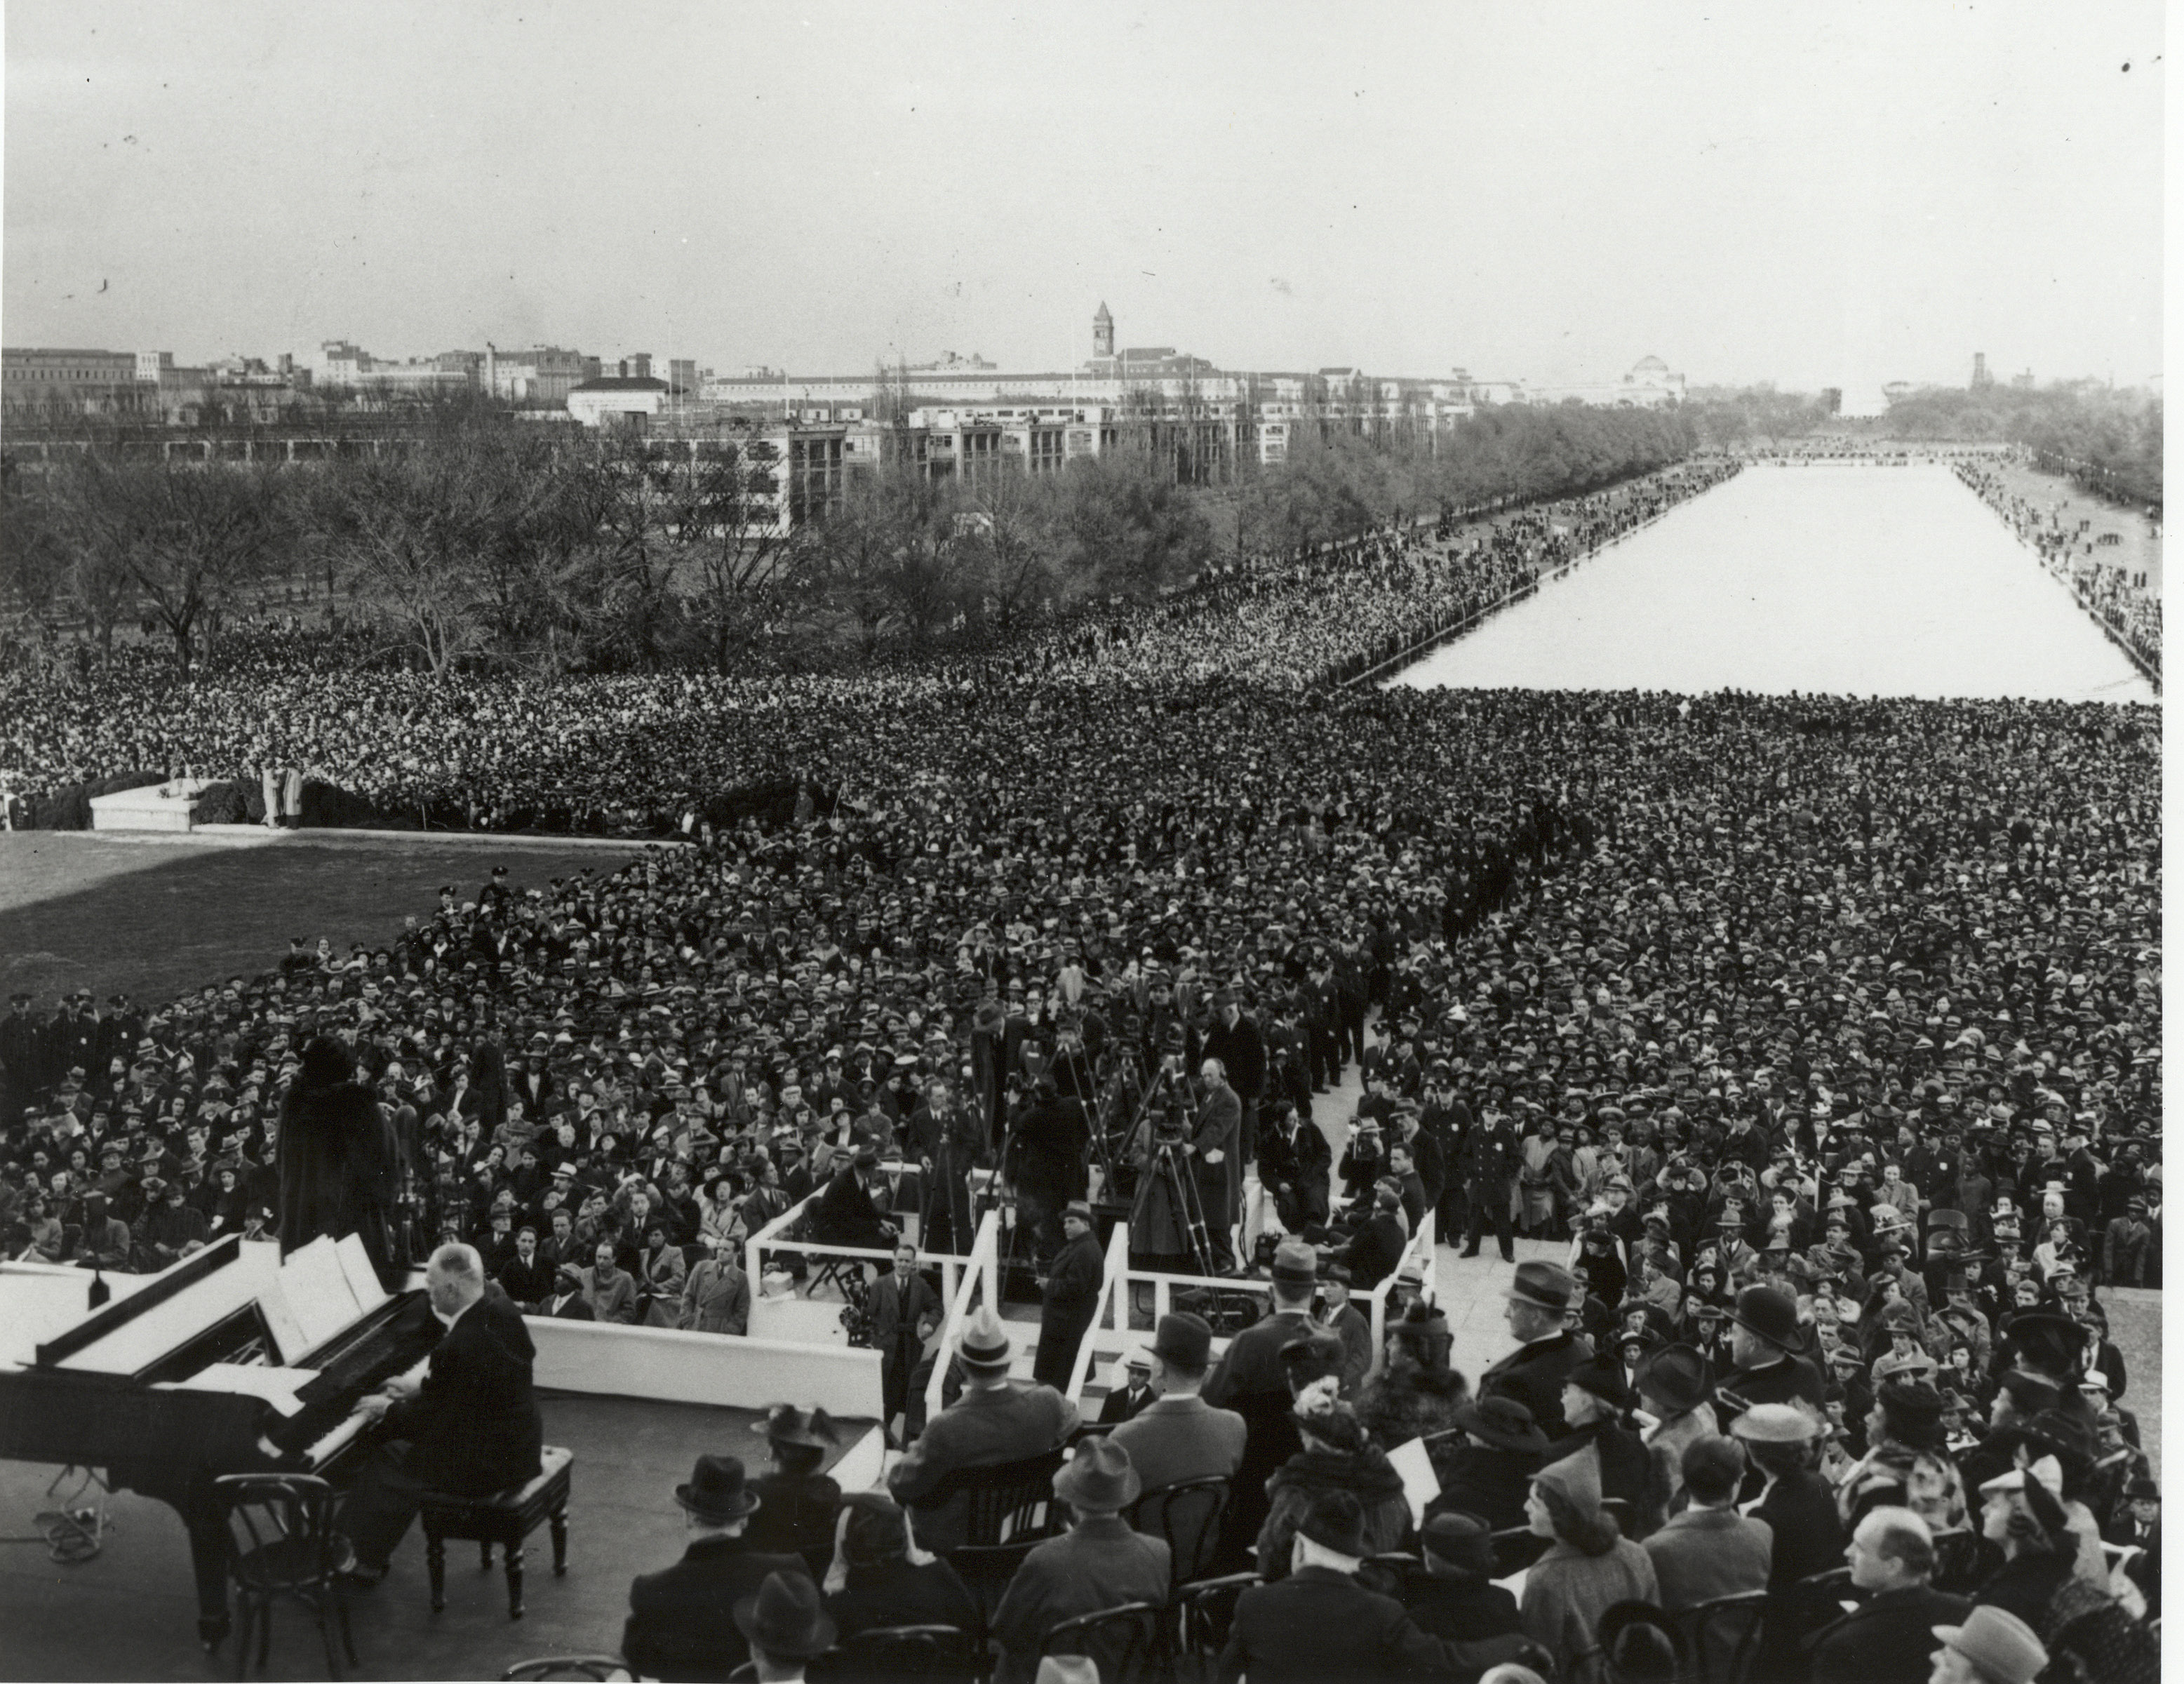 Marian Anderson Lincoln Memorial performance